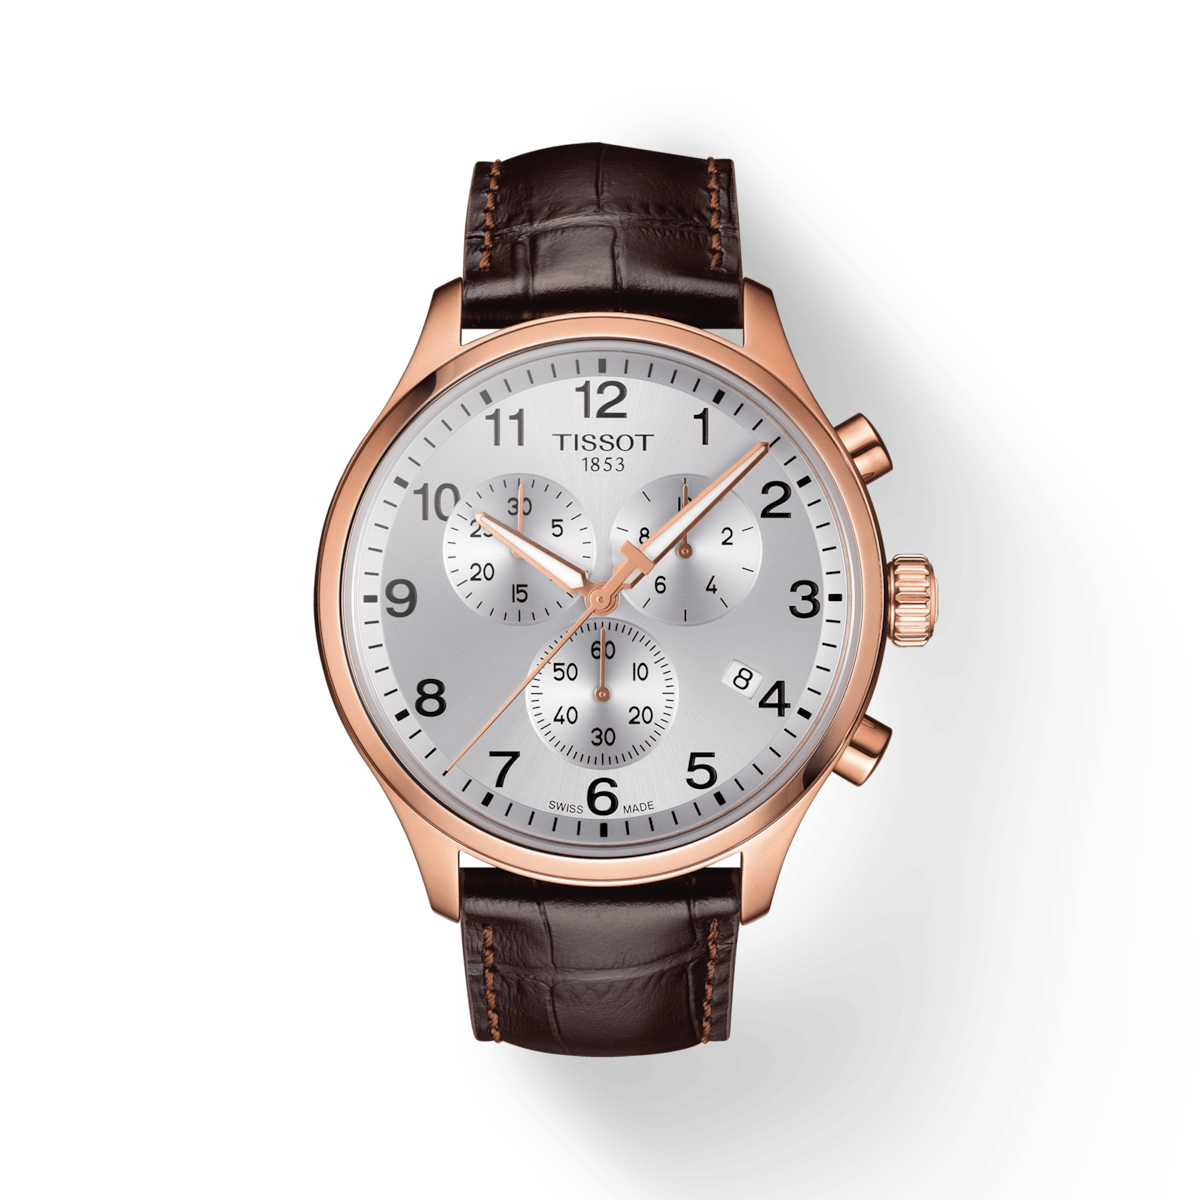 T-Sport Chrono XL Classic Silver & Brown Leather